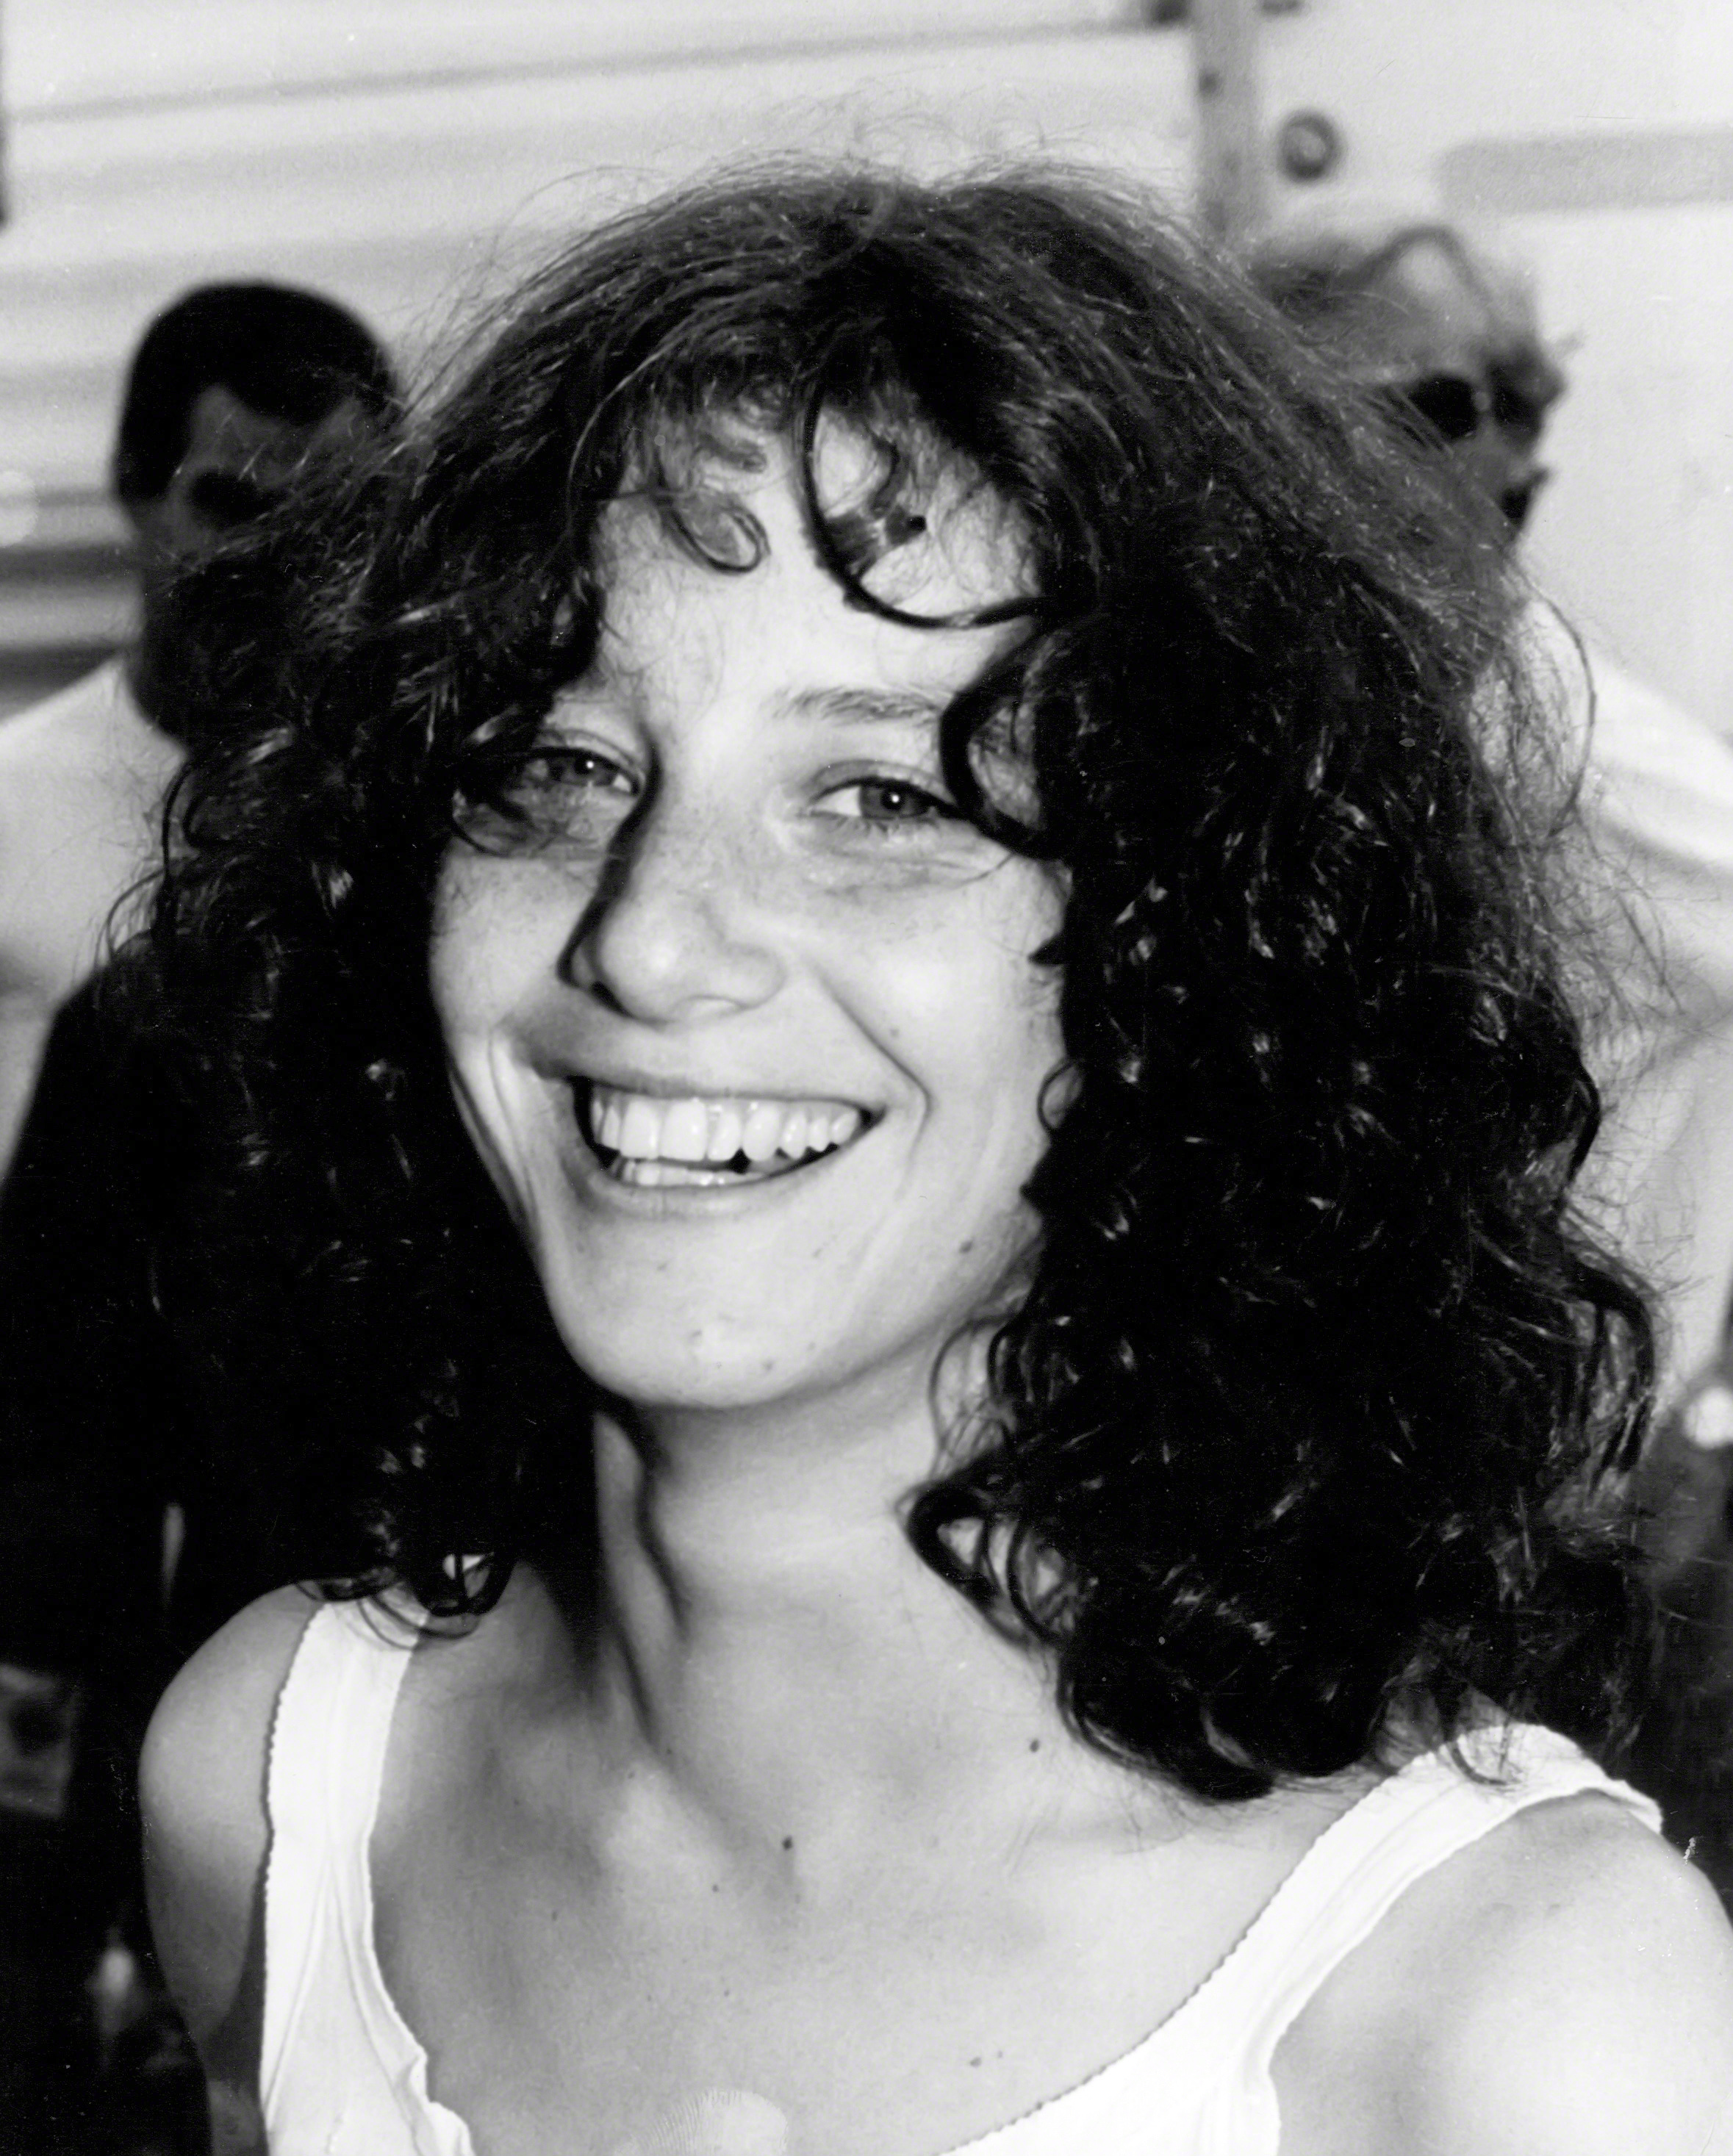 Debra Winger pictured on January 1, 1980 in New York City. | Source: Getty Images